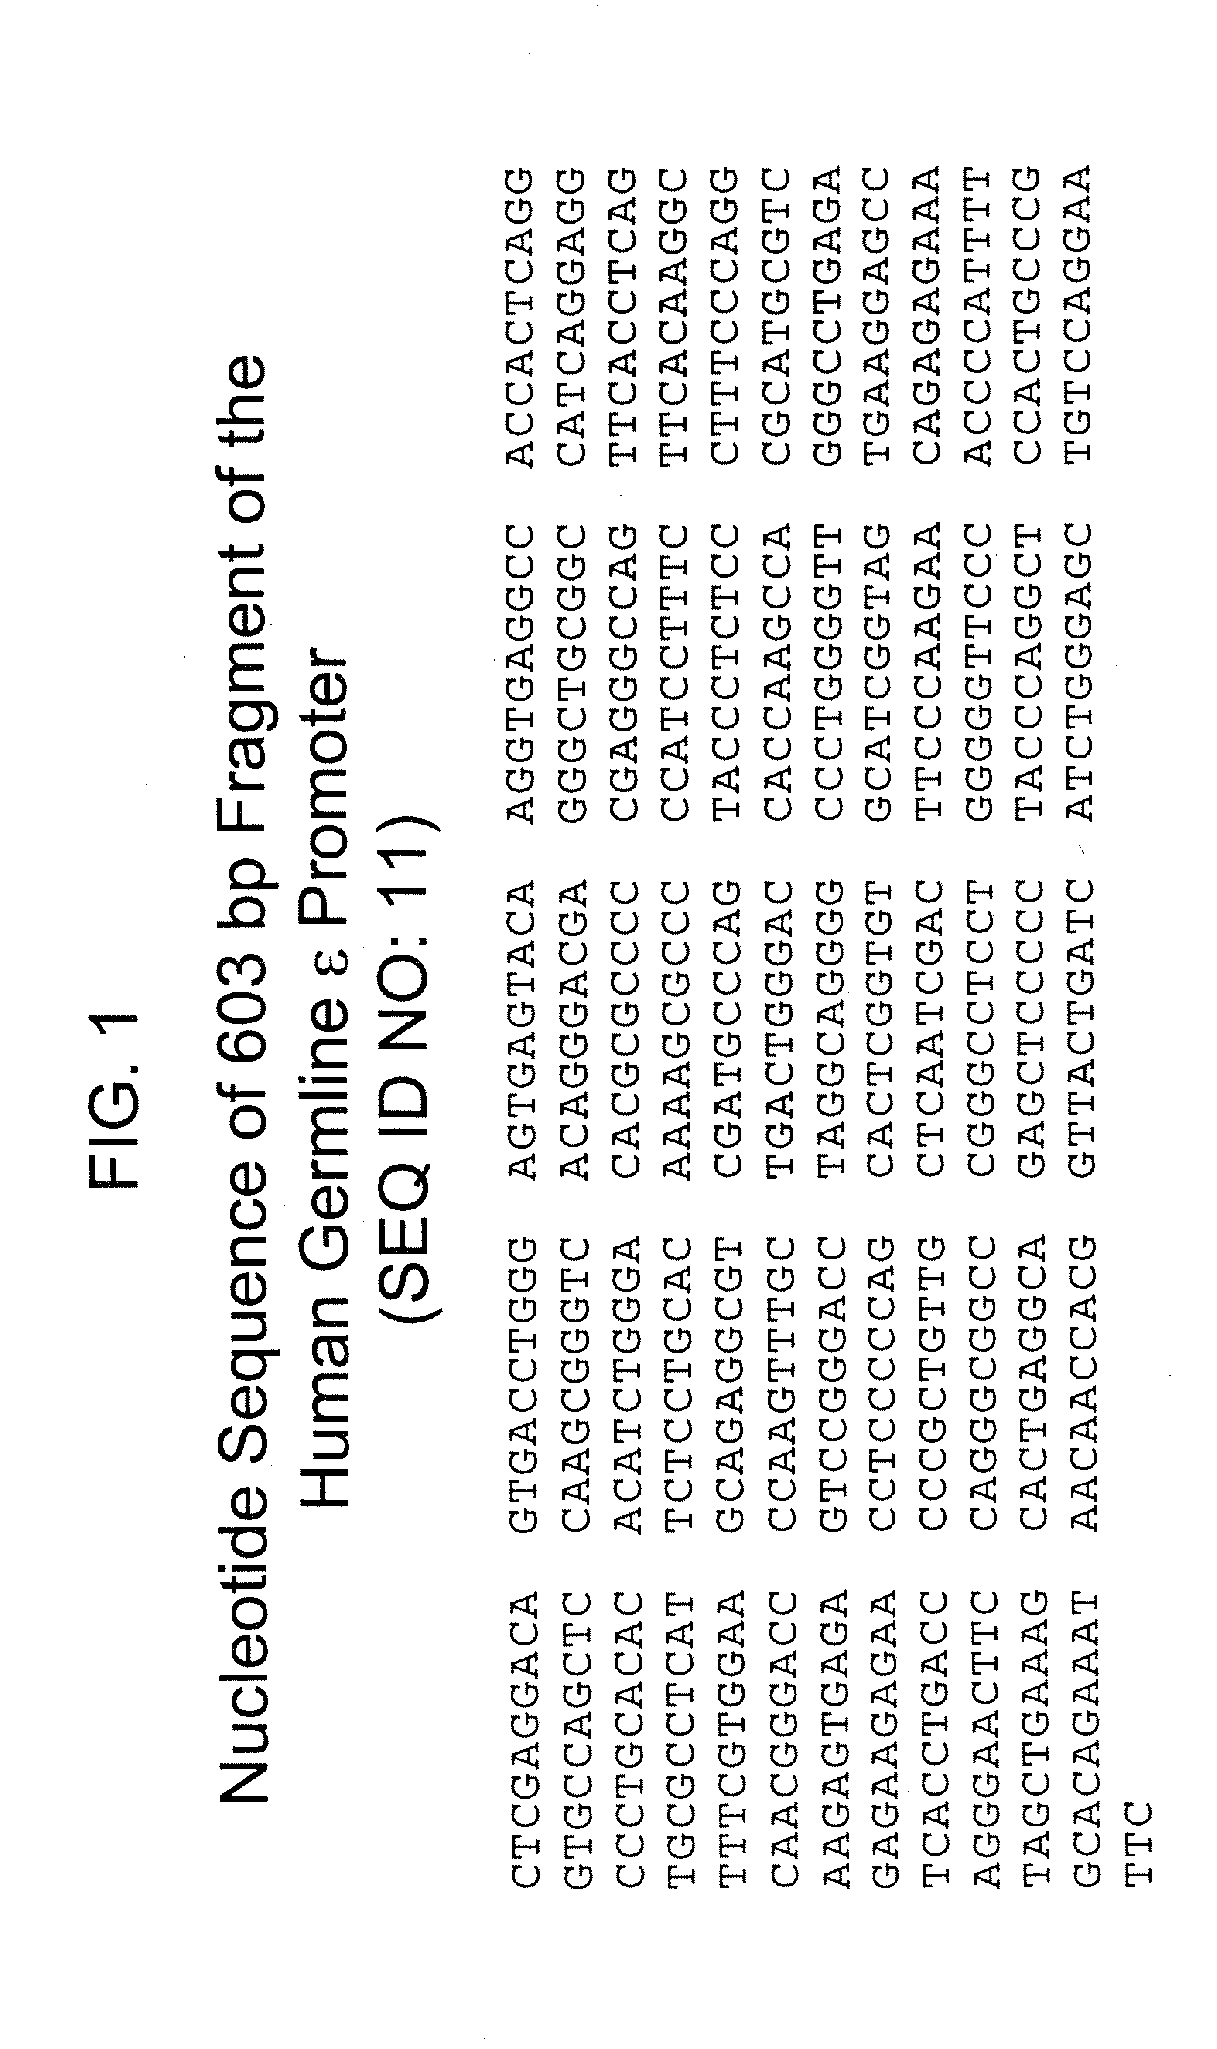 Methods of identifying compounds that modulate il-4 receptor-mediated ige synthesis utilizing a chloride intracellular channel 1 protein